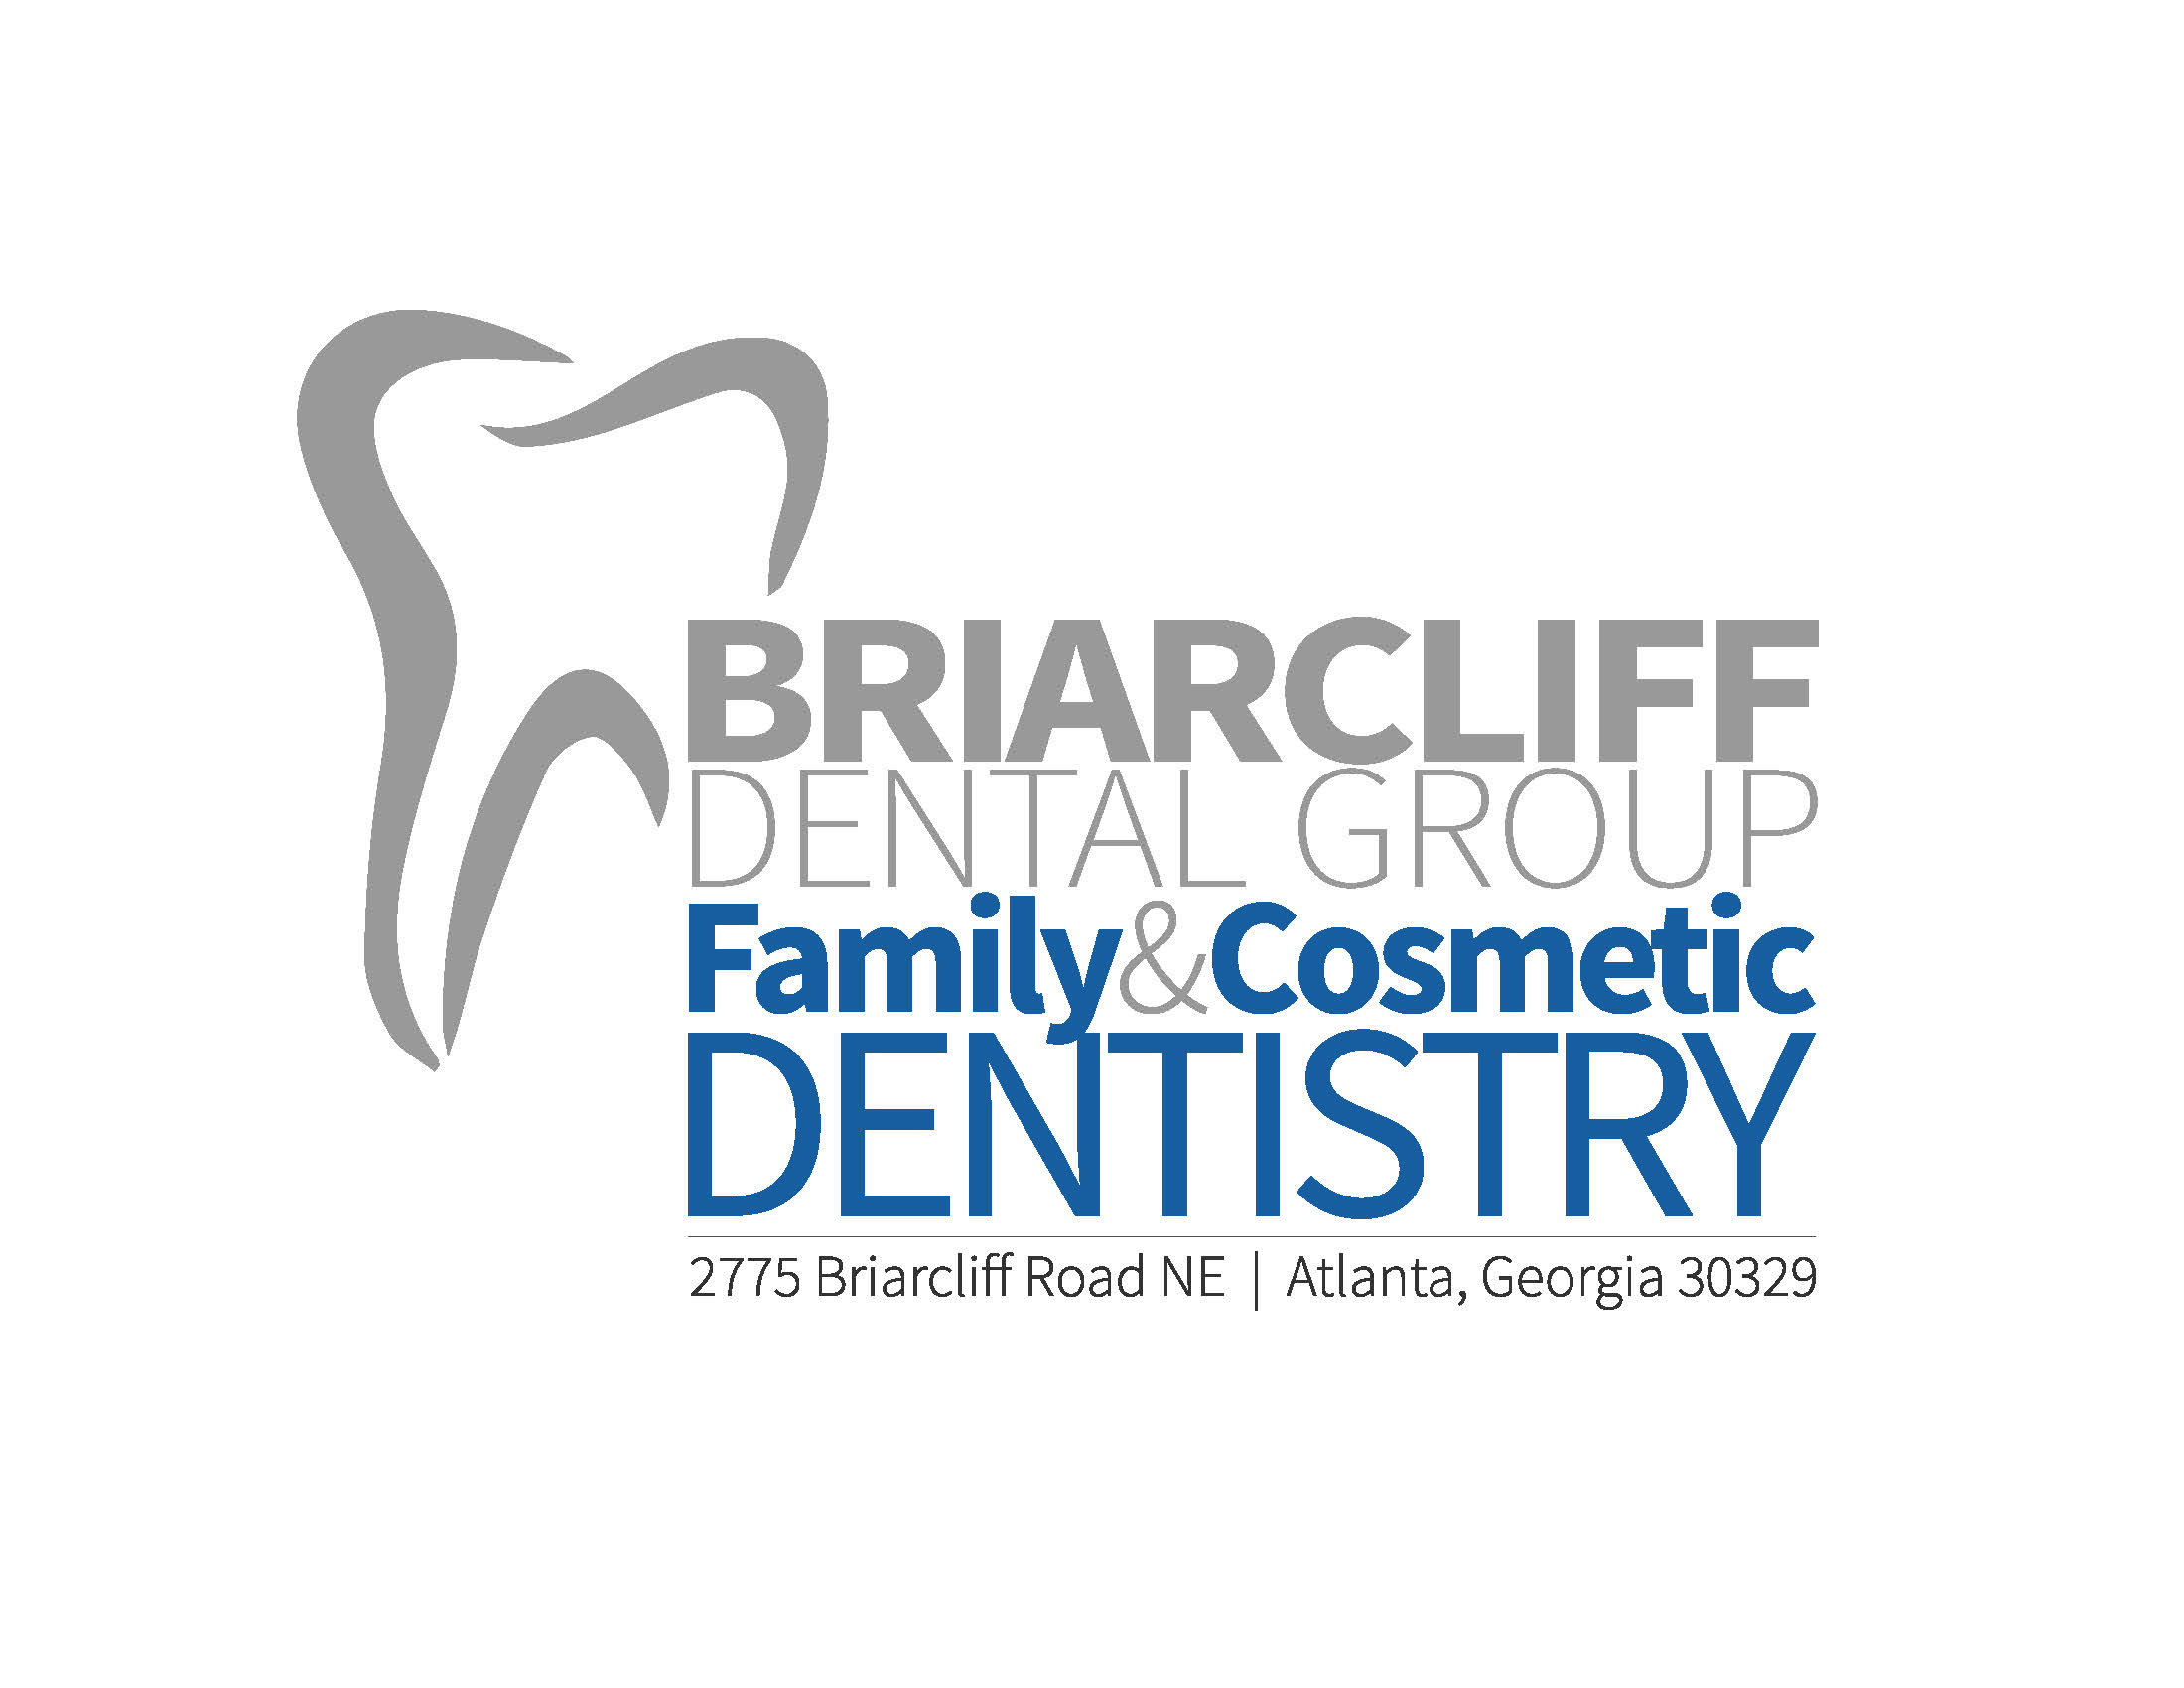 Briarcliff Dental Group